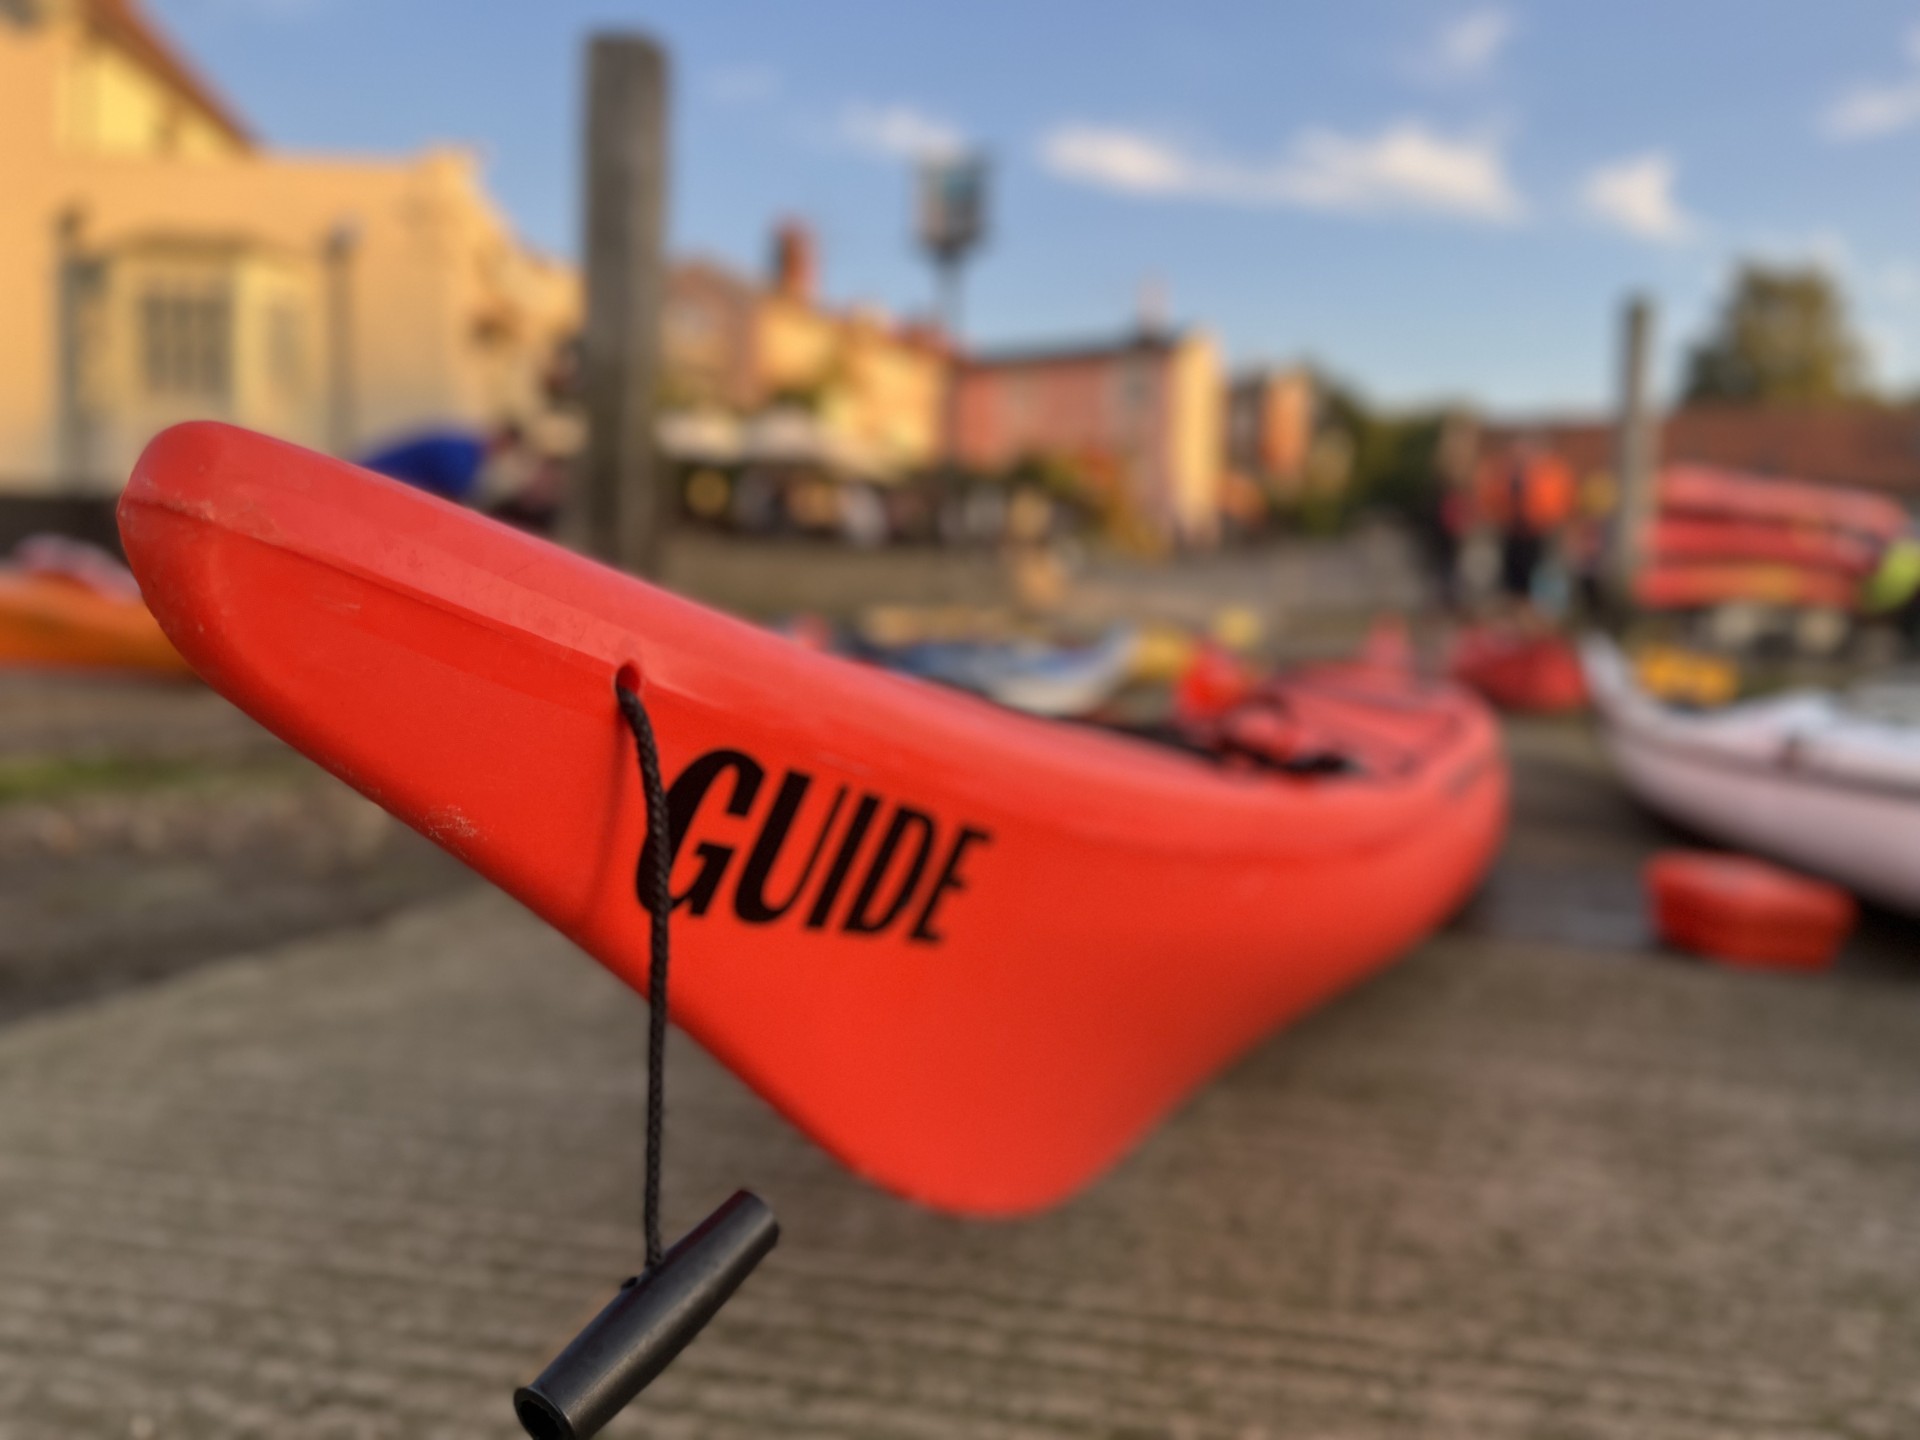 Orange sea kayak with 'Guide' on the bow.